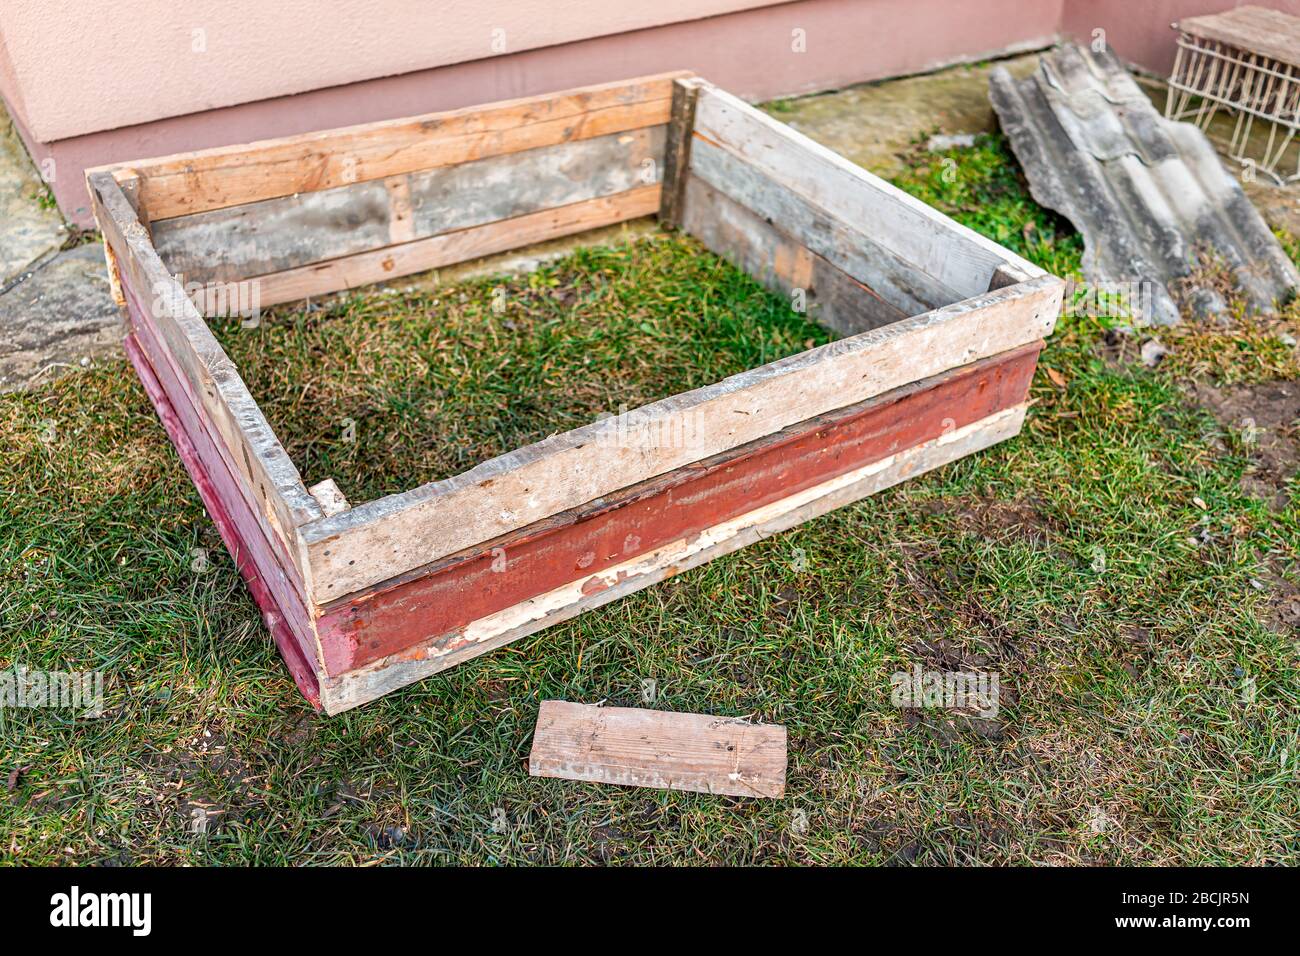 Diy Project Construction Of Vegetable Winter Garden For Raised Bed